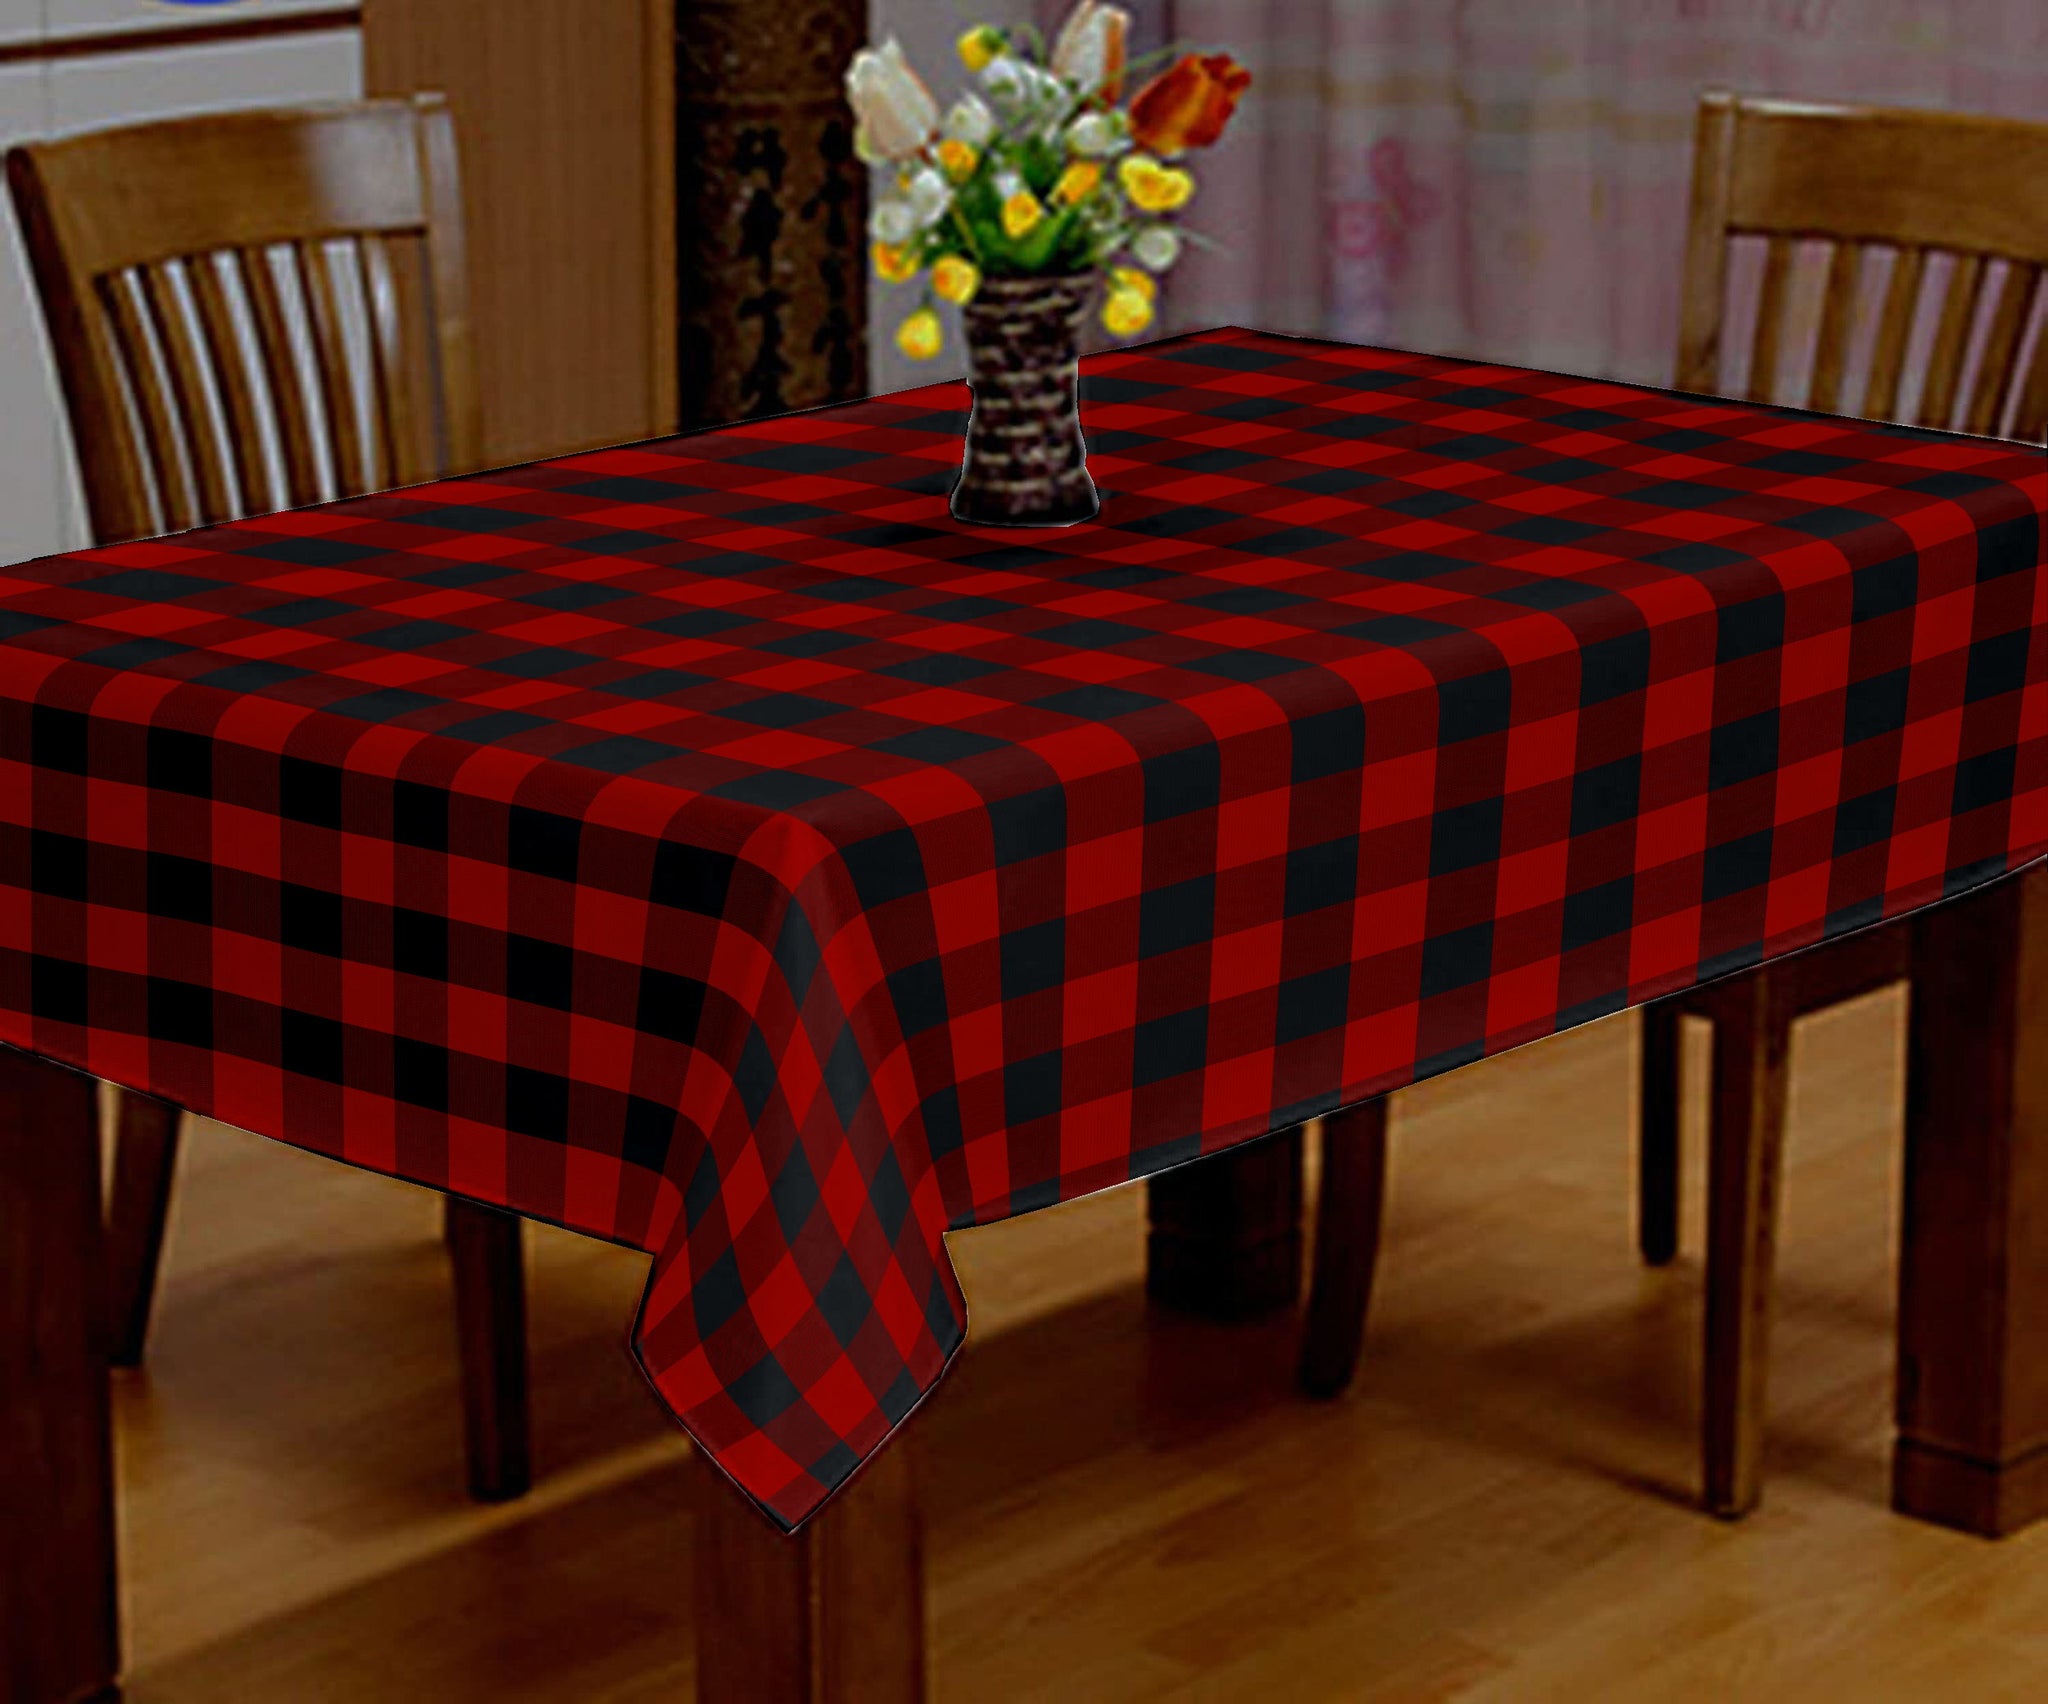 Lushomes Table Cover, Buffalo Checks Red & Black Plaid Dining Table Cover Cloth (Size 40 x 40”, Side Table Cloth)